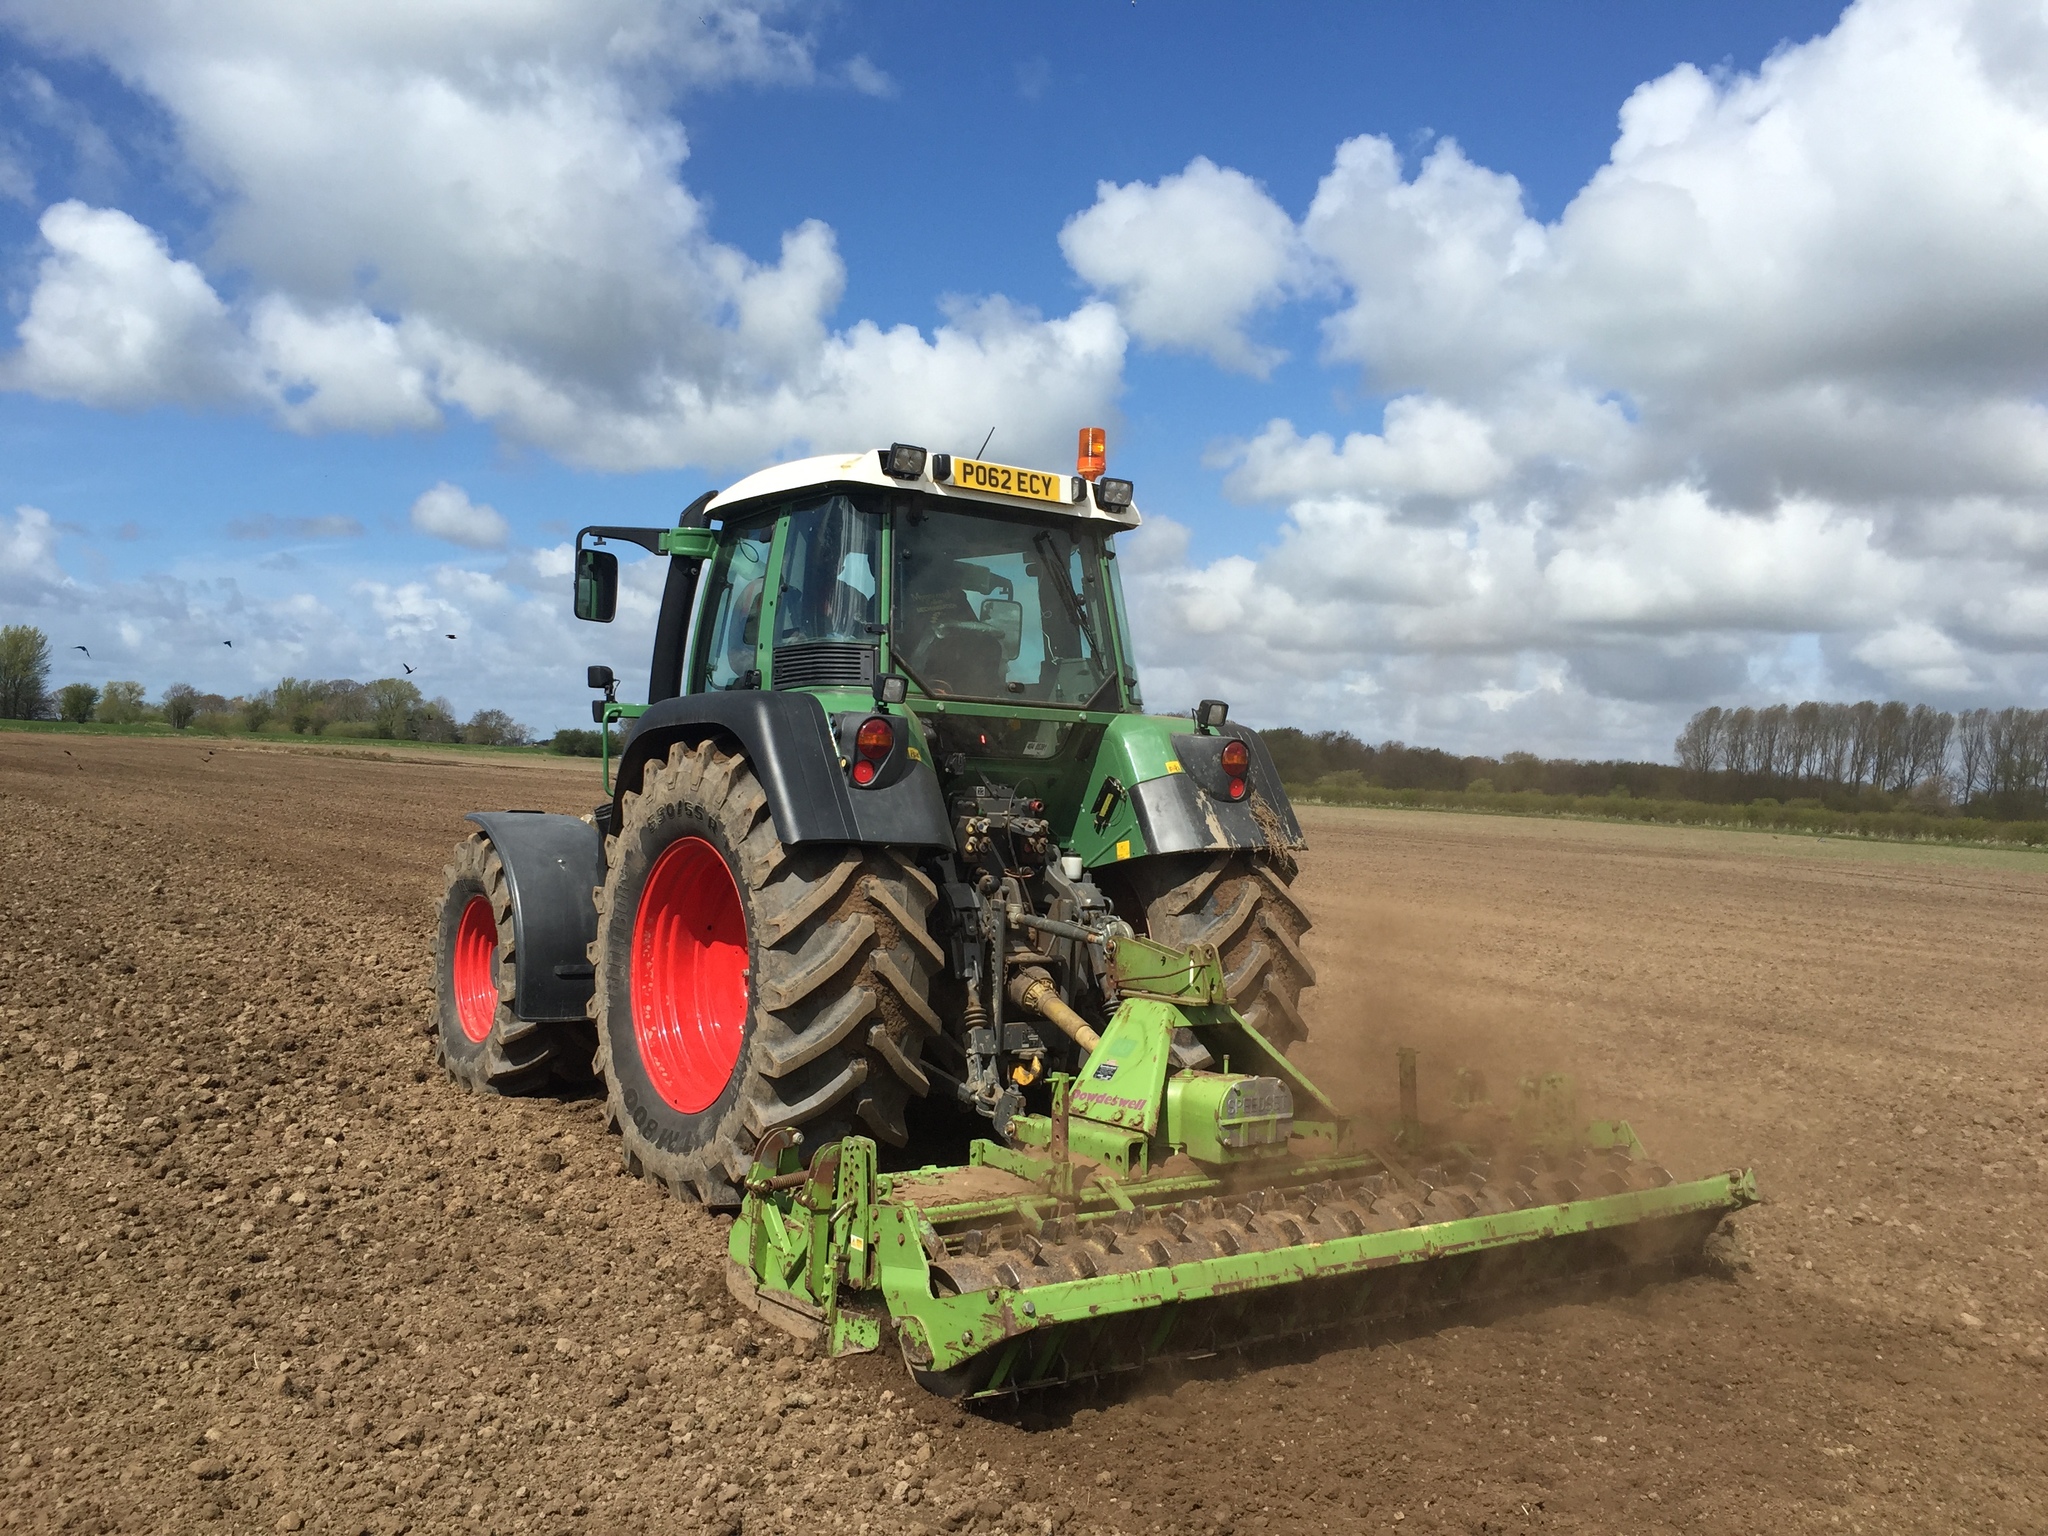 Myerscough College Agricultural Engineering Courses - Tractor ploughing field